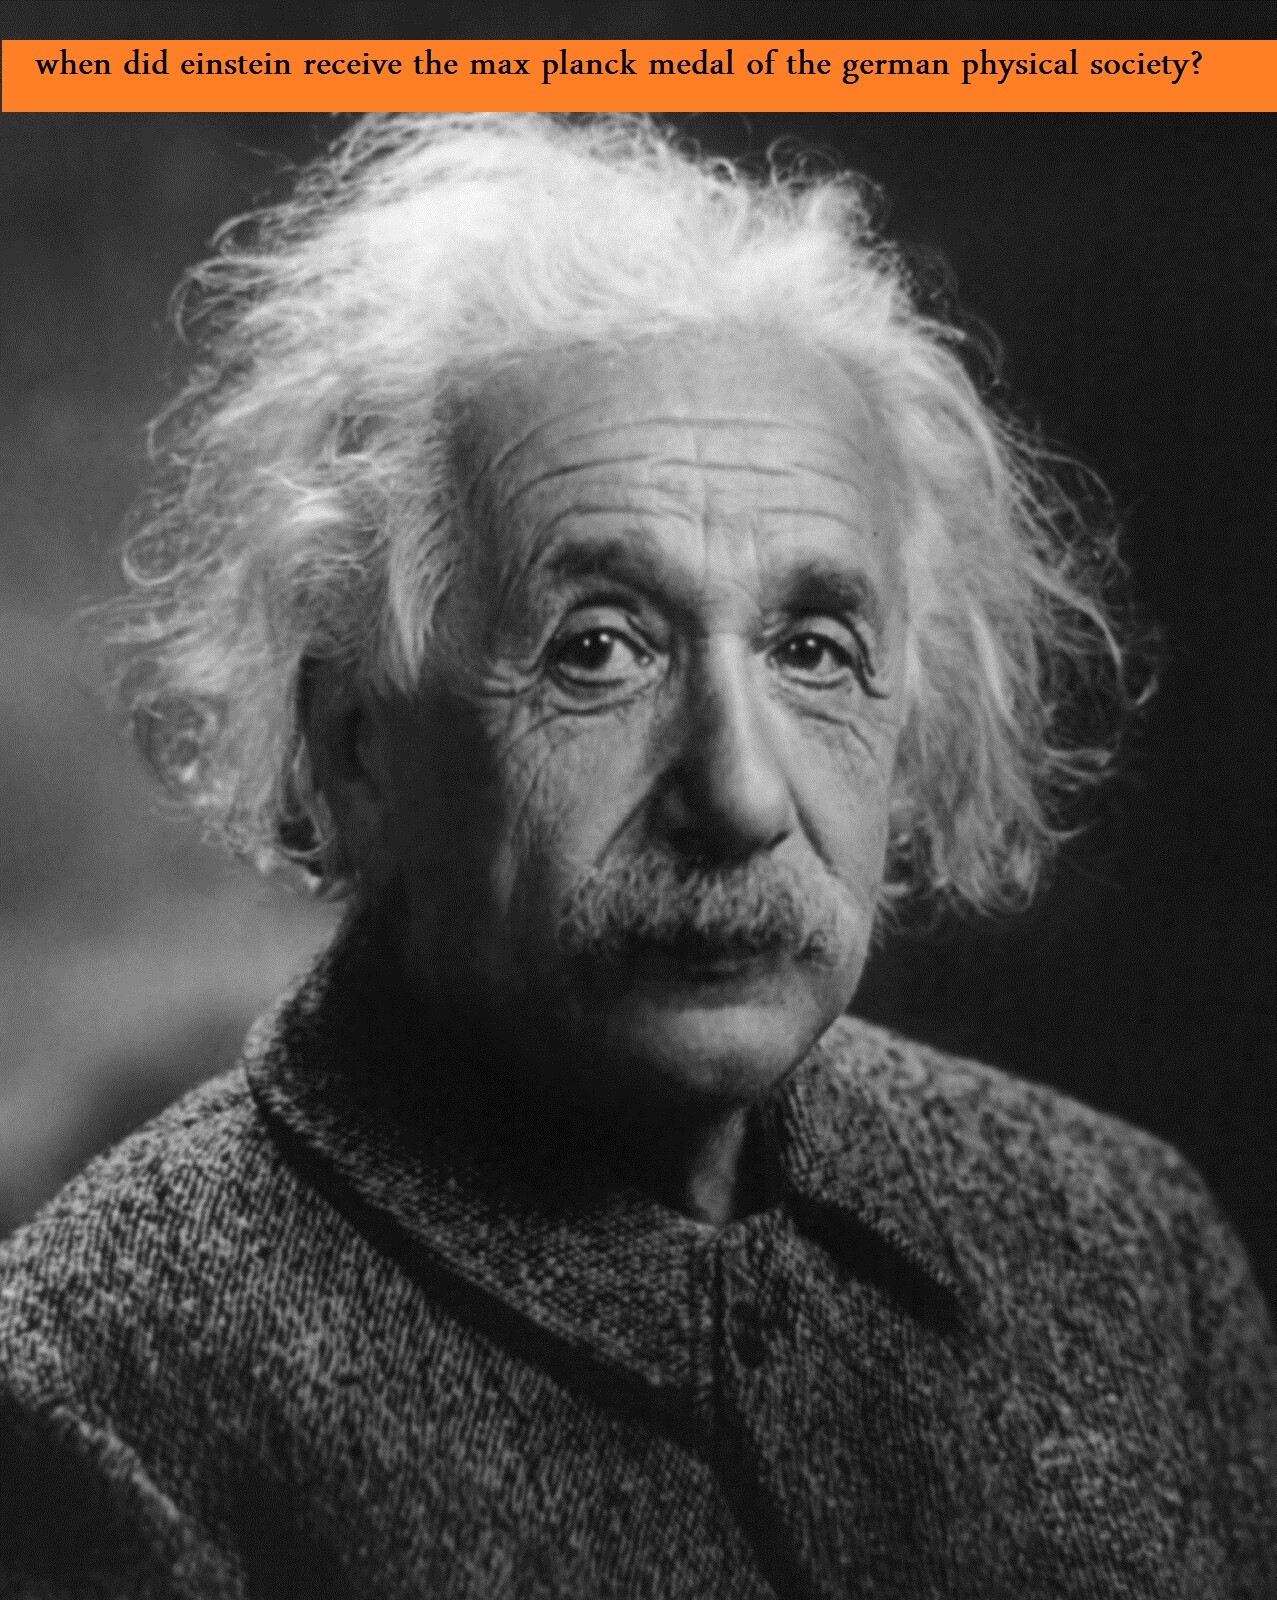 when did einstein receive the max planck medal of the german physical society?